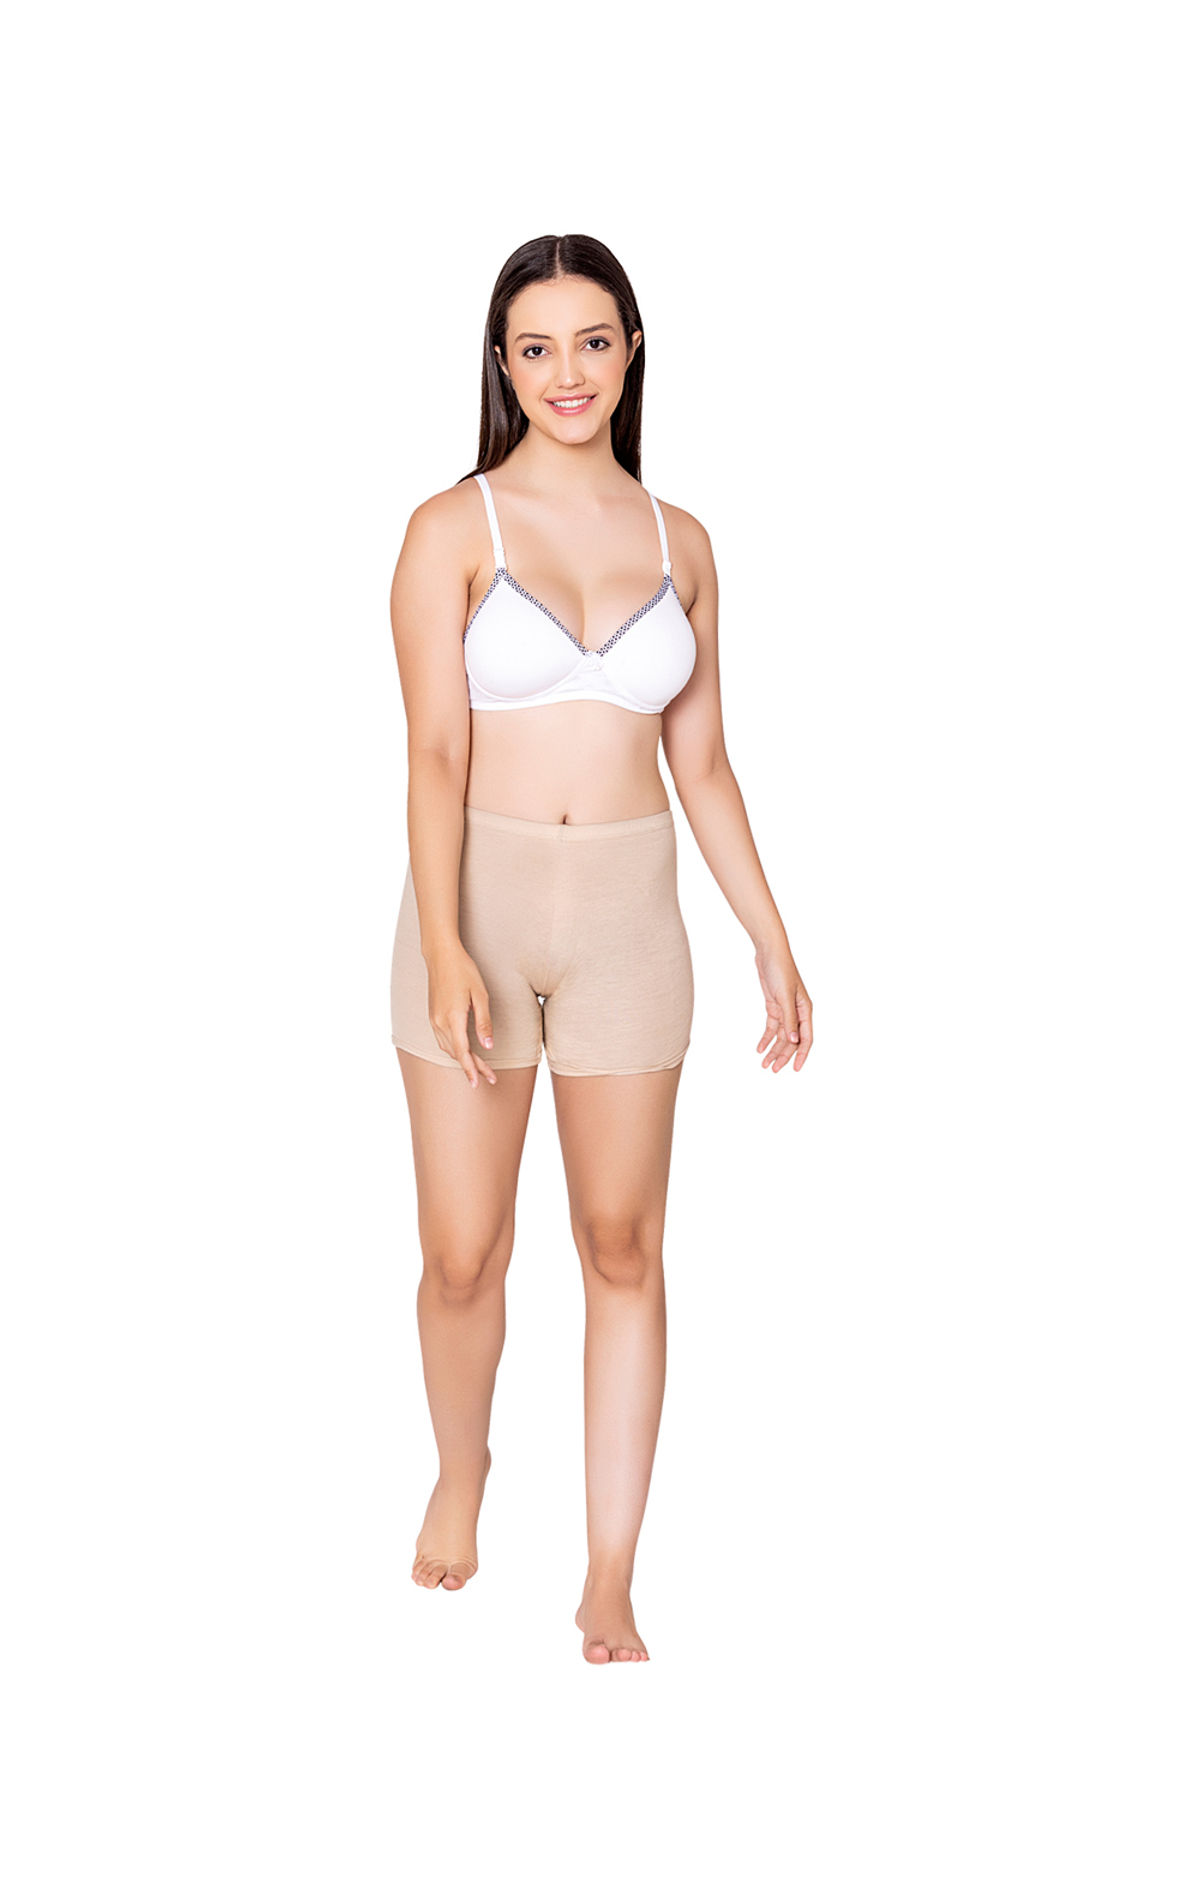 Beige Daily Wear Plain Dyed Hypoallergenic Soft Cotton Padded Bra With  Adjustable Straps at Best Price in Noida